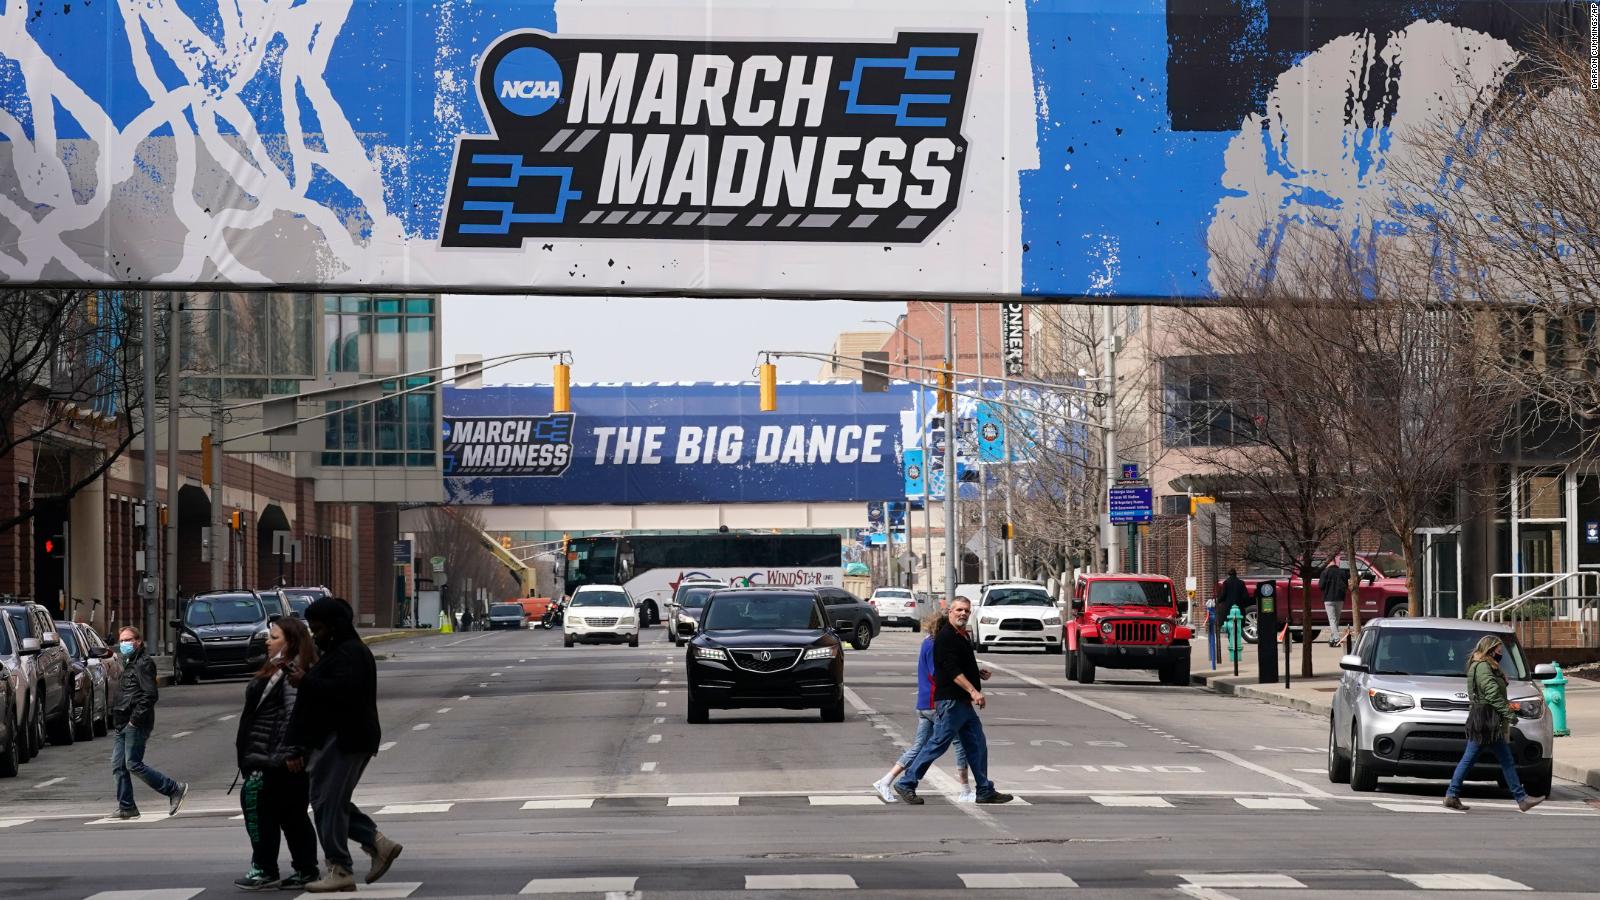 As March Madness descends on Indianapolis, the city struggles with some